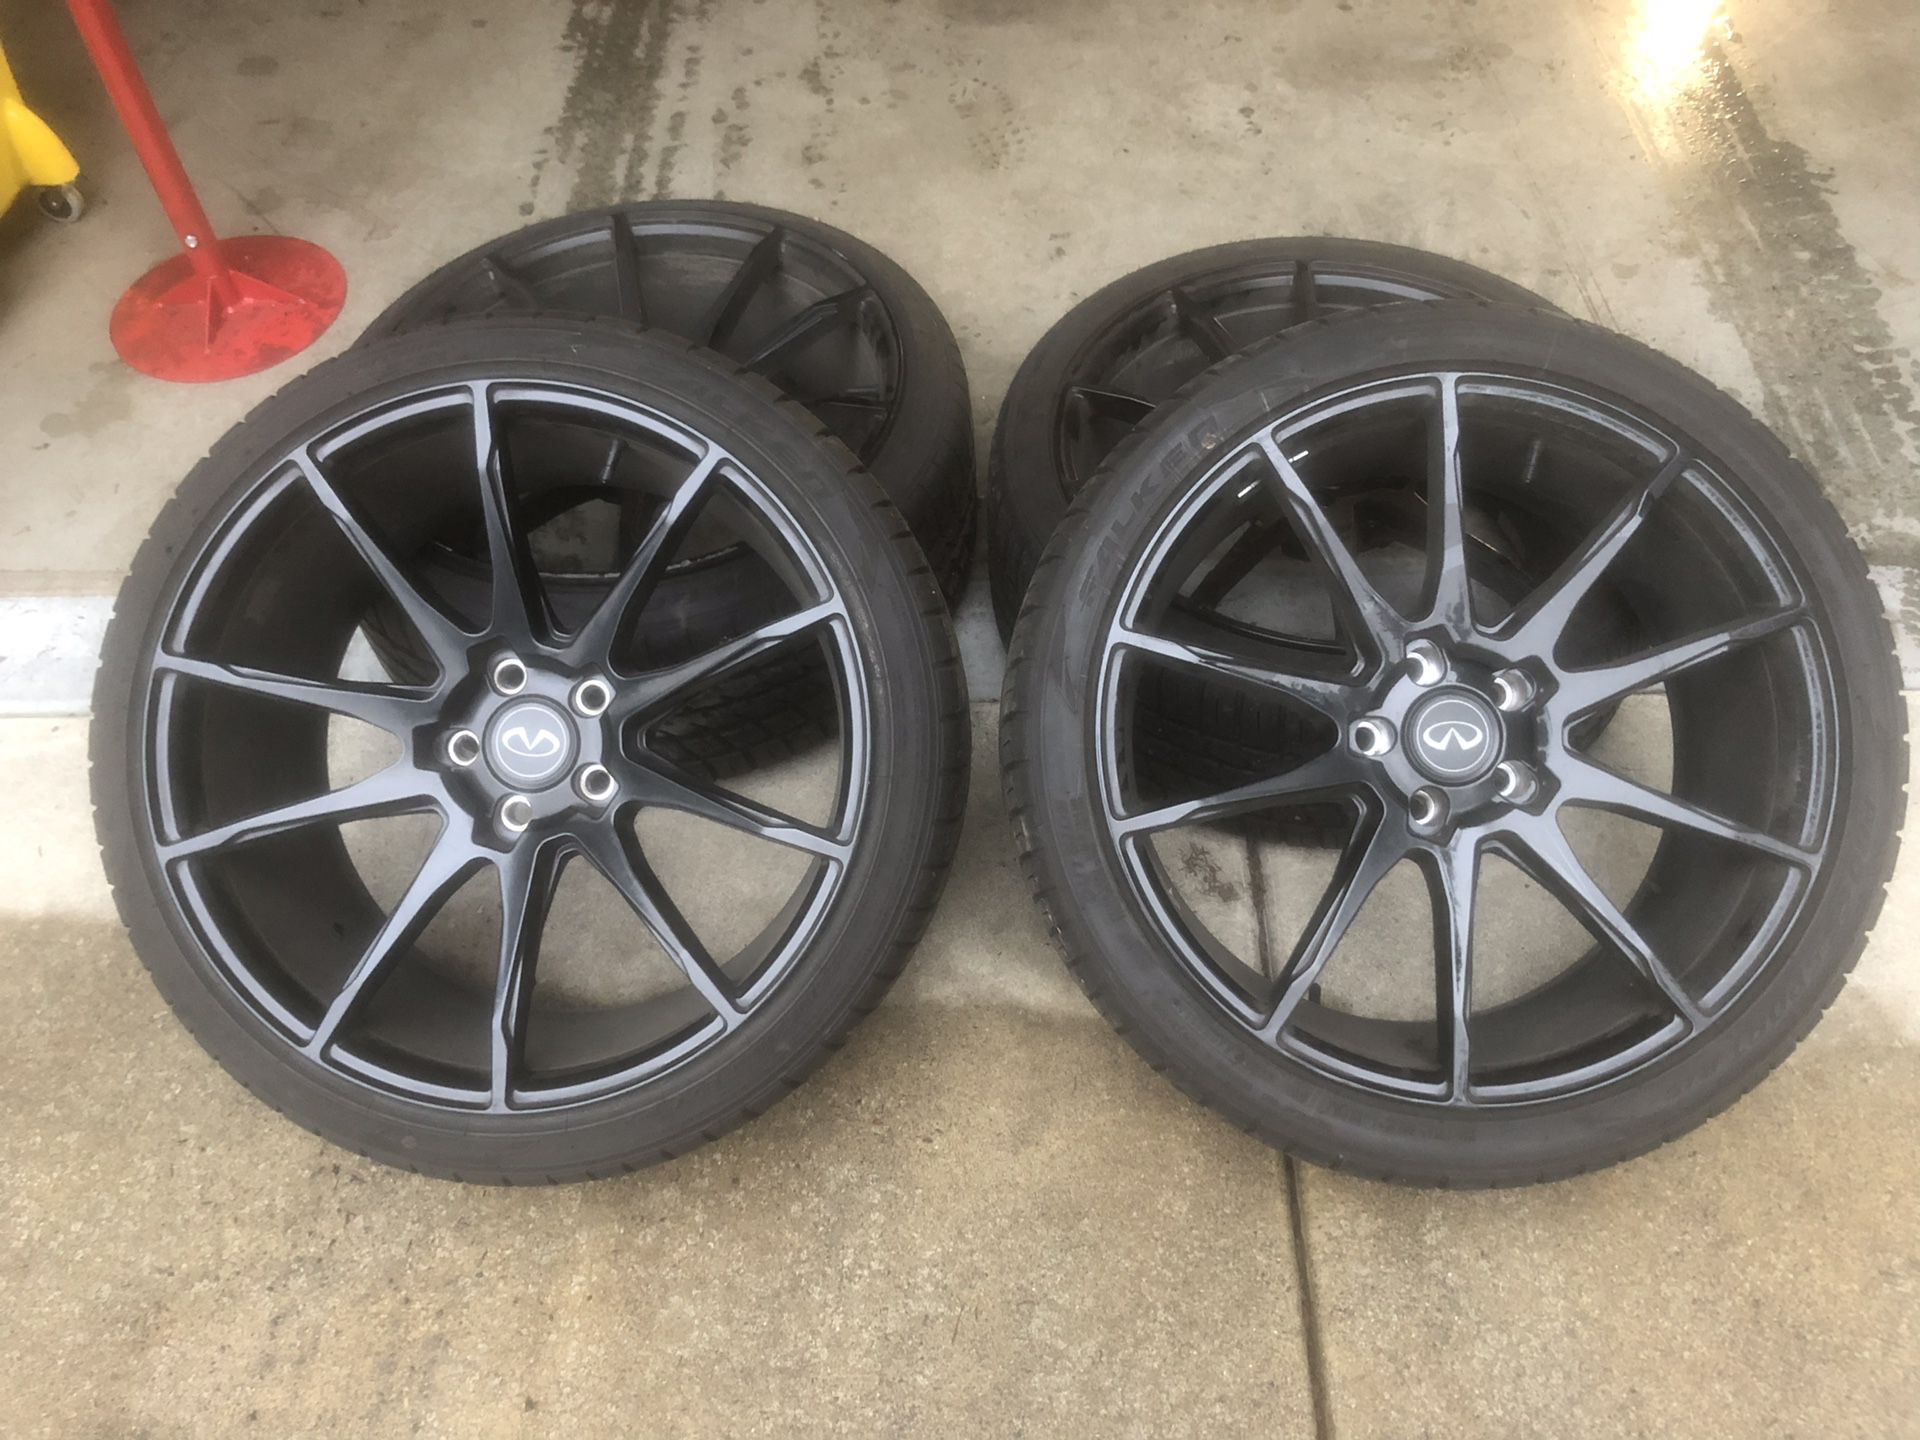 20” black rims and tires